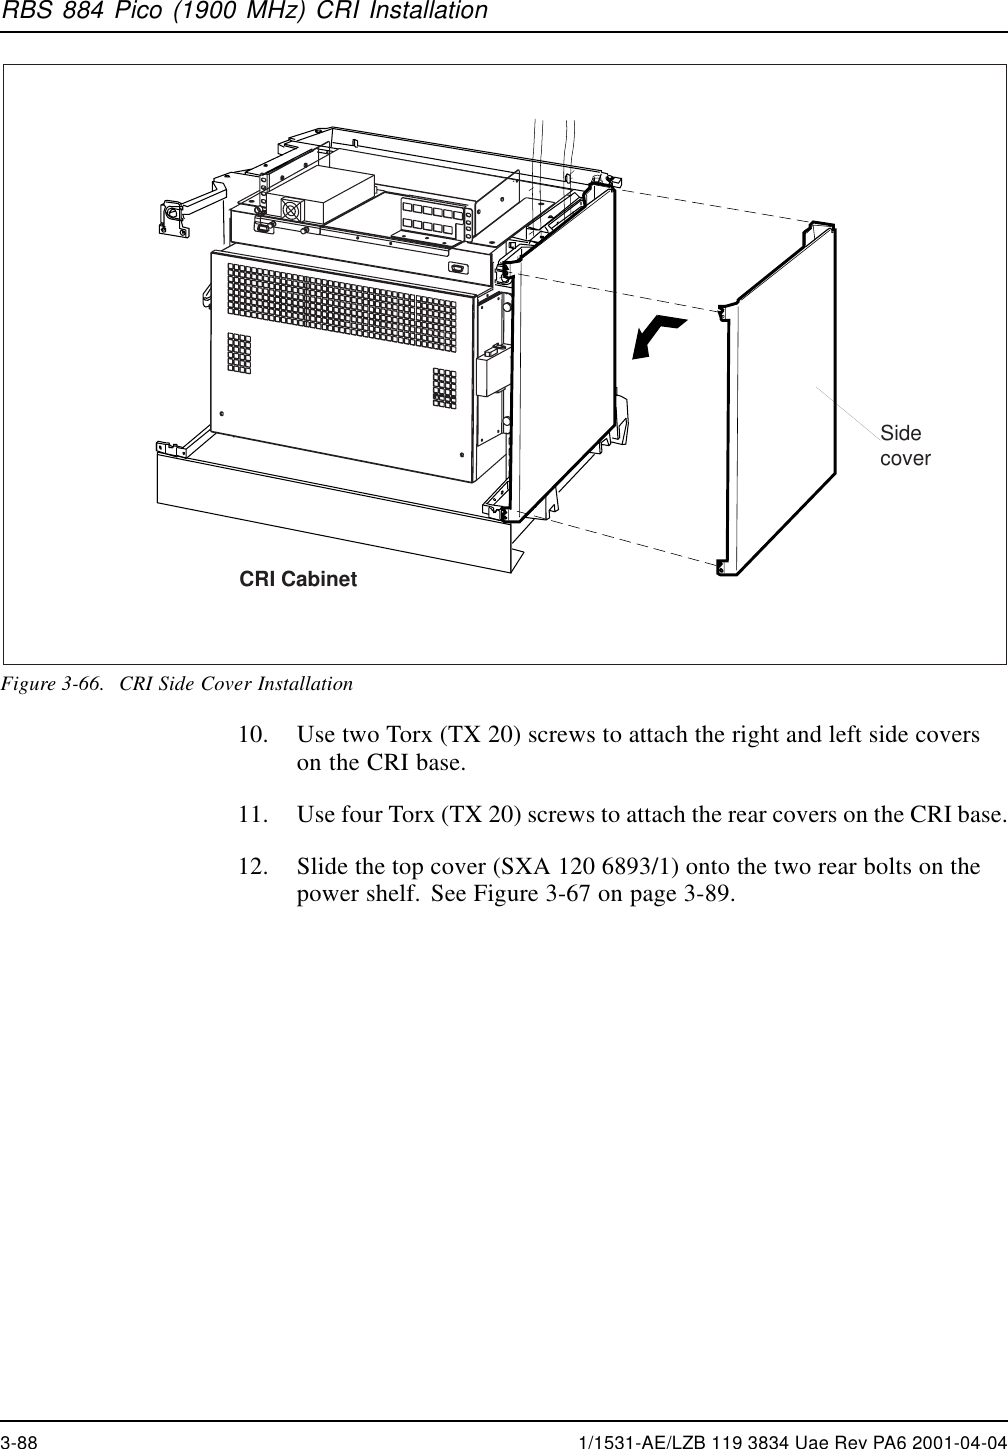 RBS 884 Pico (1900 MHz) CRI InstallationCRI CabinetSidecoverFigure 3-66. CRI Side Cover Installation10. Use two Torx (TX 20) screws to attach the right and left side coverson the CRI base.11. Use four Torx (TX 20) screws to attach the rear covers on the CRI base.12. Slide the top cover (SXA 120 6893/1) onto the two rear bolts on thepower shelf. See Figure 3-67 on page 3-89.3-88 1/1531-AE/LZB 119 3834 Uae Rev PA6 2001-04-04